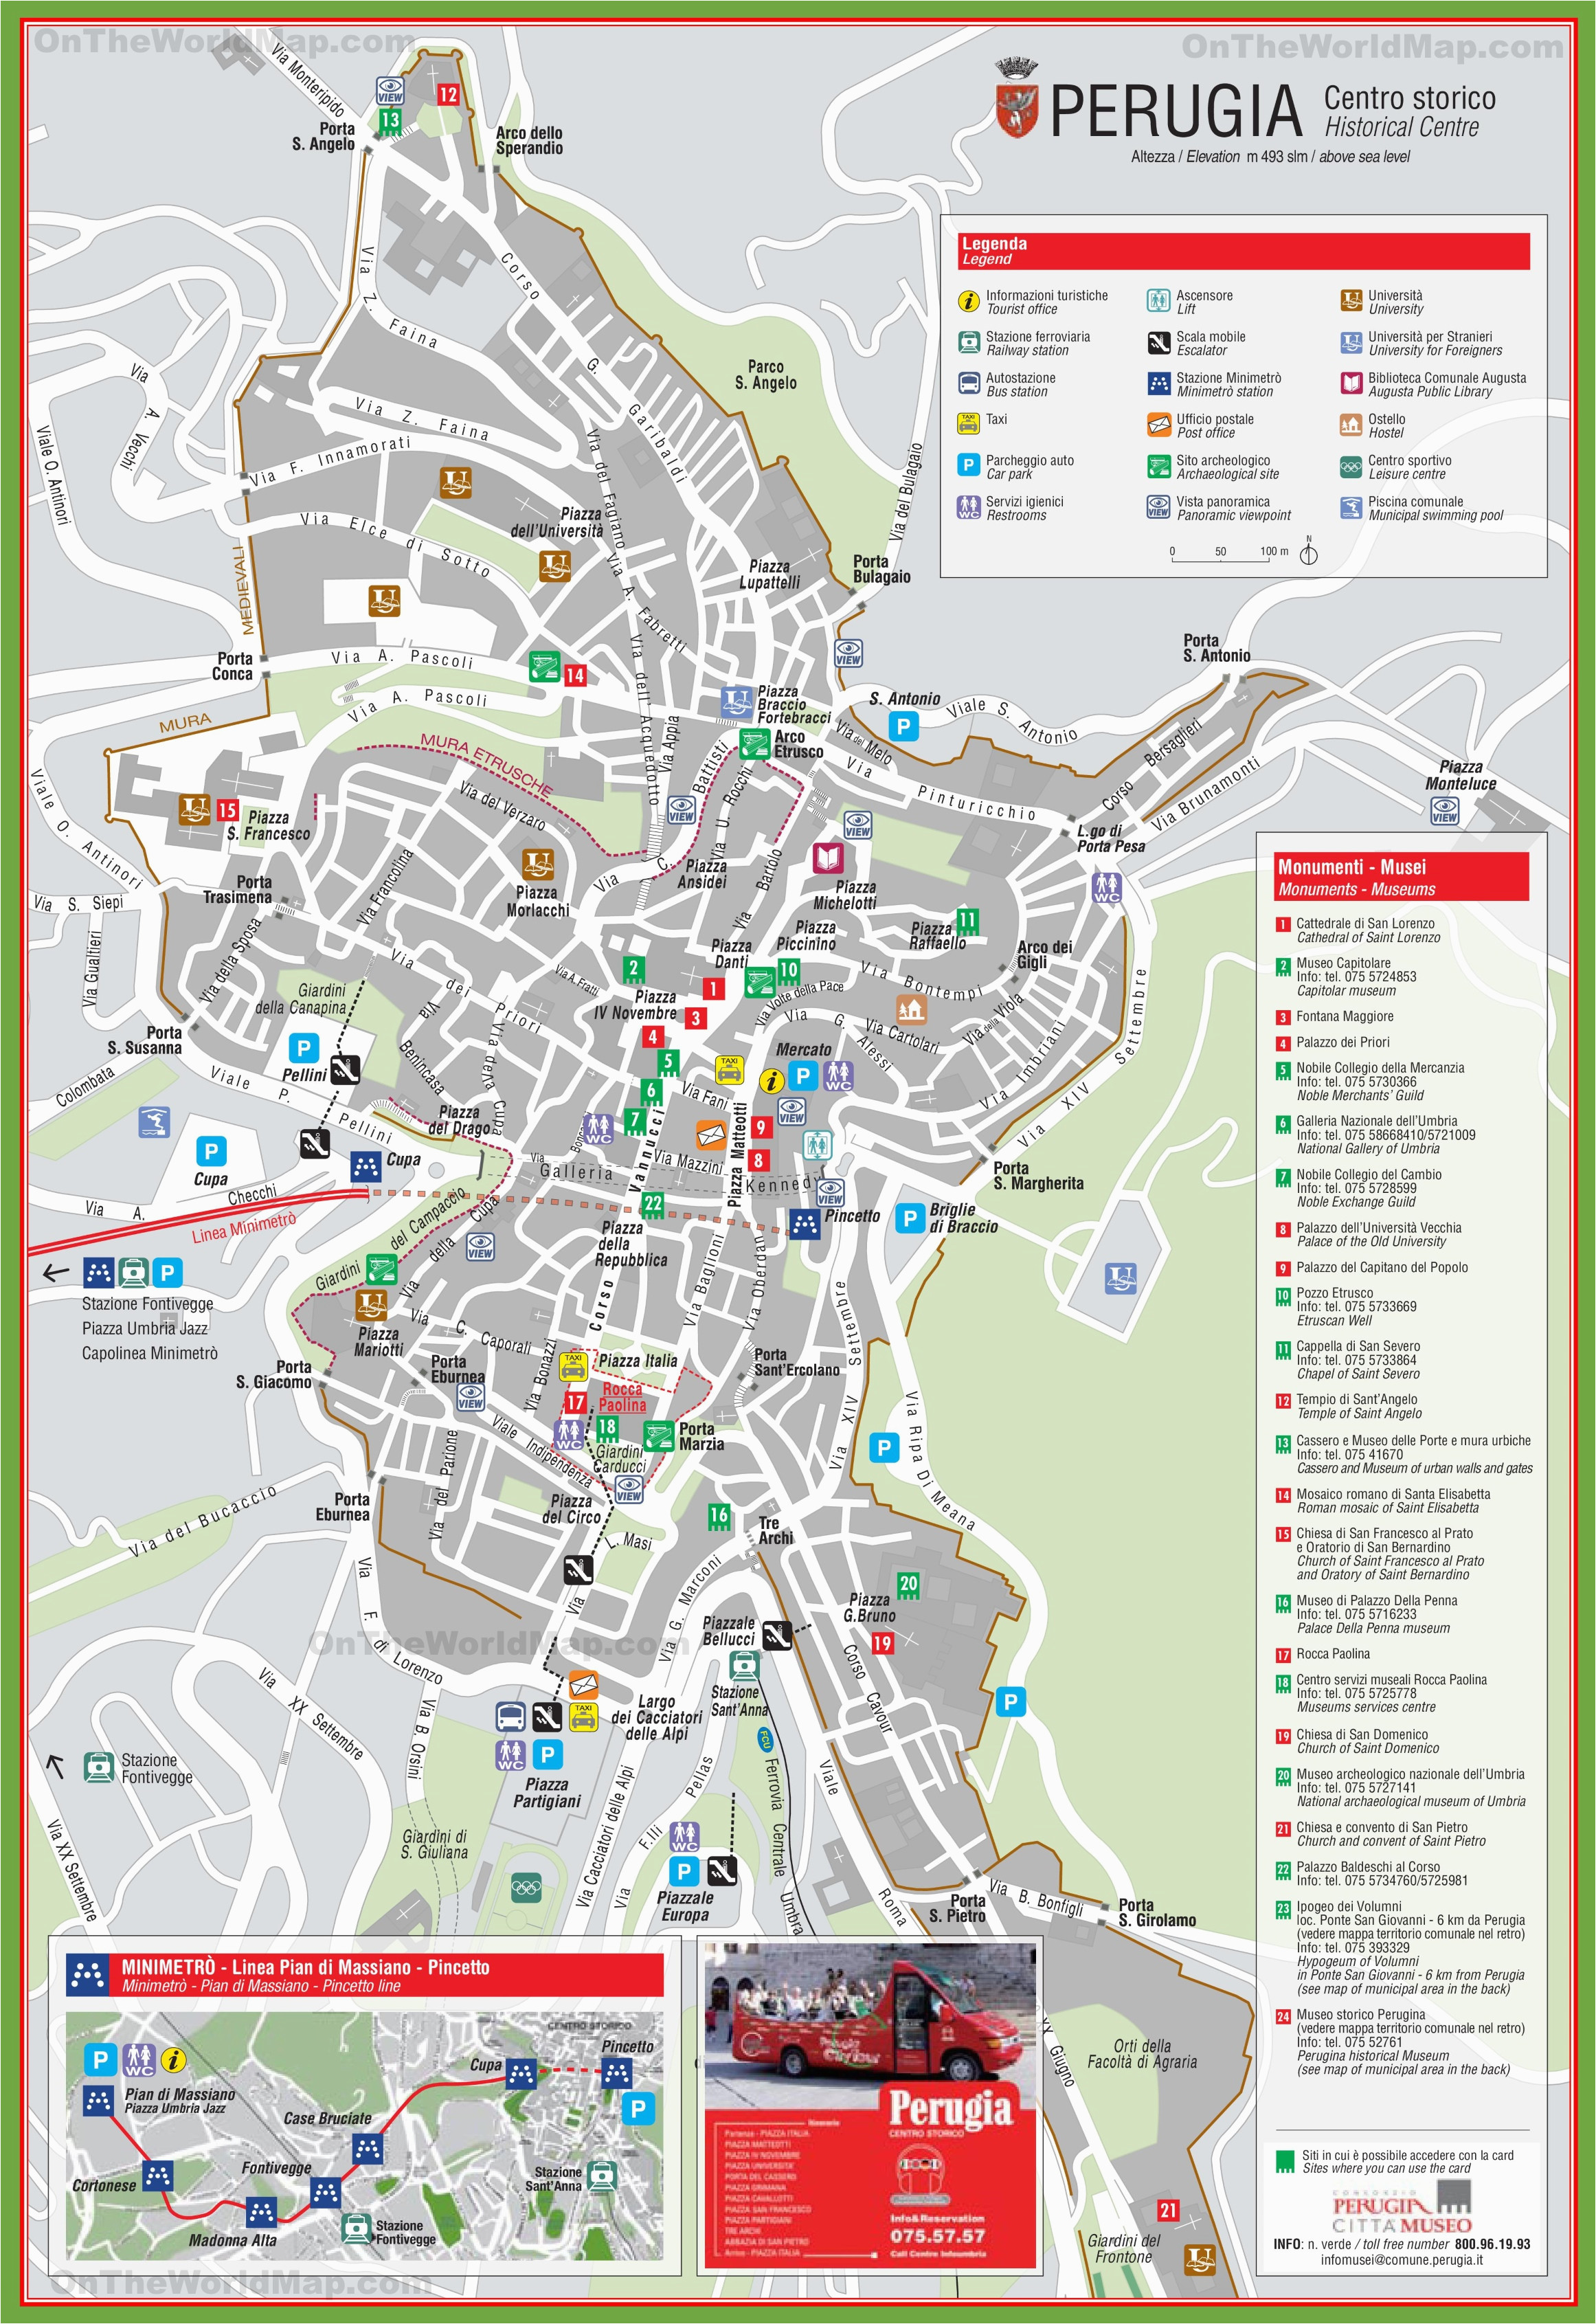 perugia tourist attractions map on of italy showing picturetomorrow